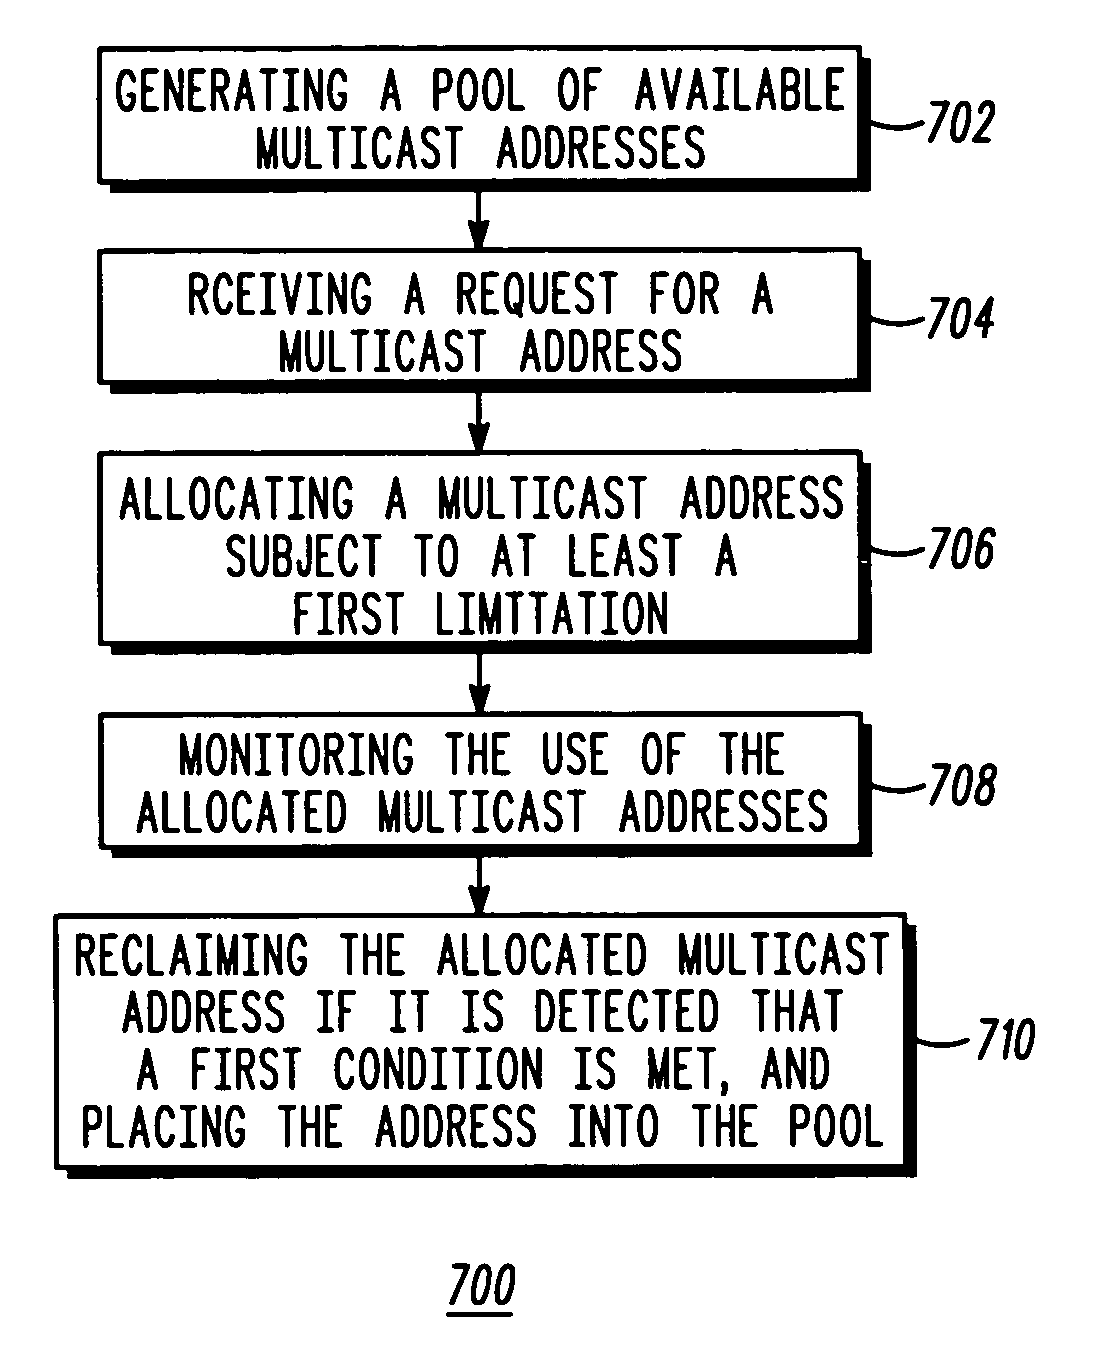 Methods for managing a pool of multicast addresses and allocating addresses in a communications system